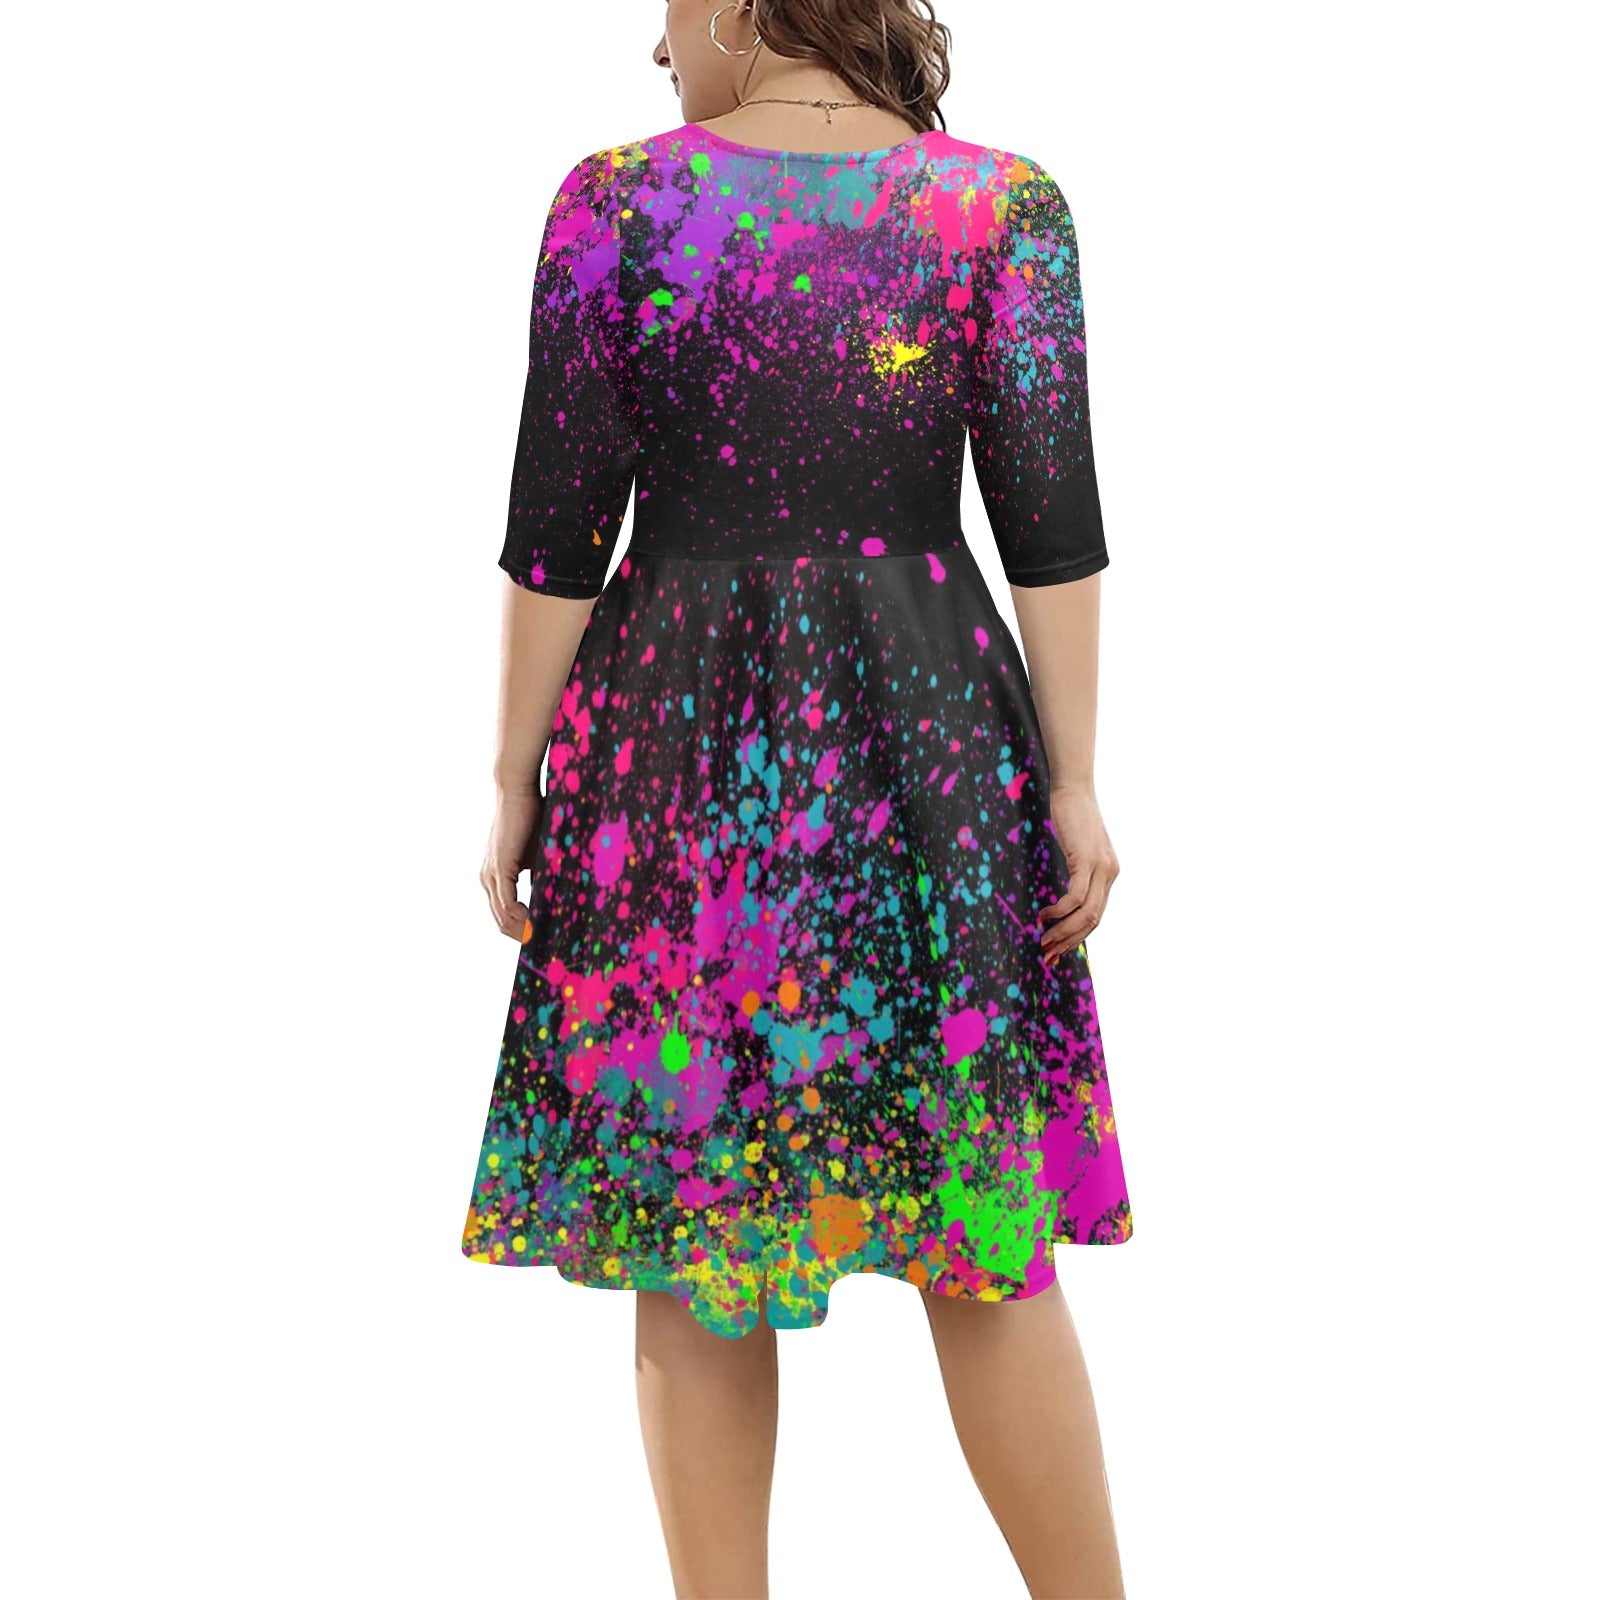 Paint Explosion dress with sleeves